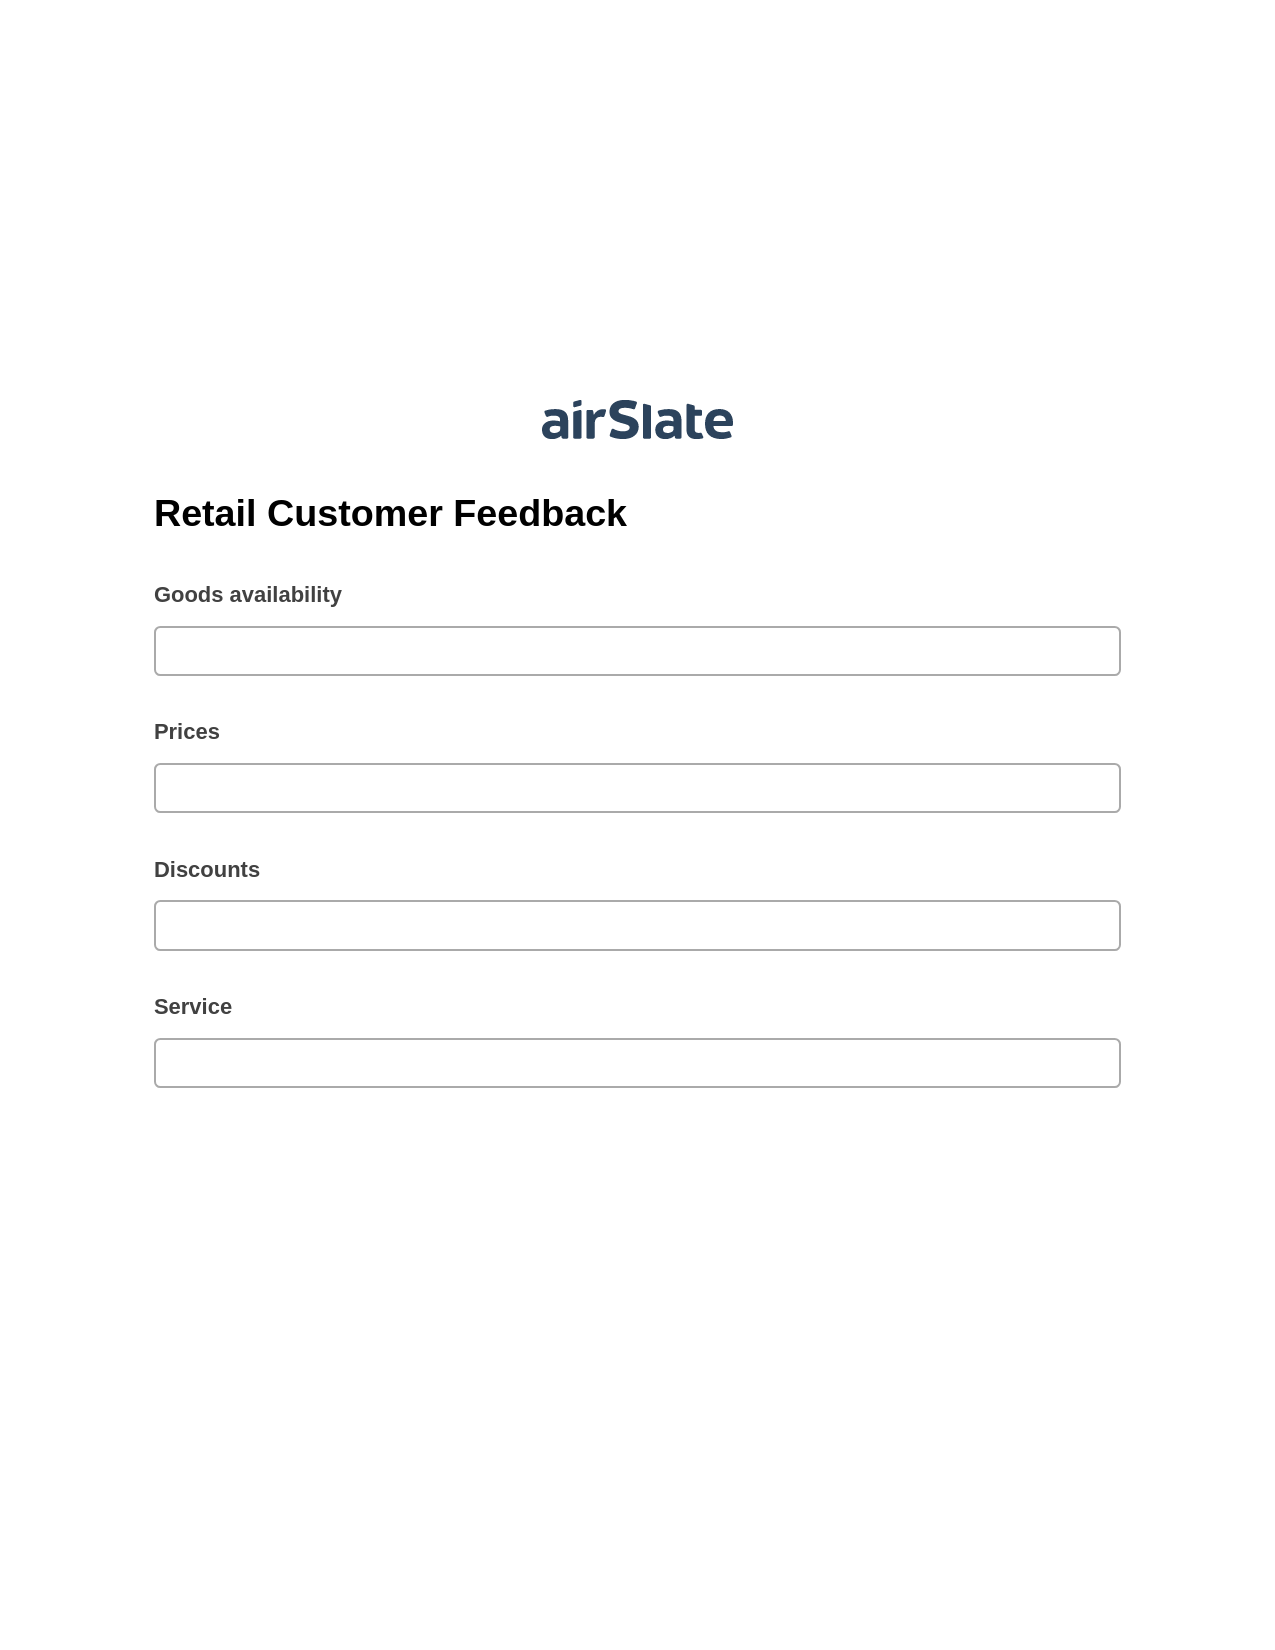 Retail Customer Feedback Pre-fill from Salesforce Record Bot, Document Hide Bot, Post-finish Document Bot